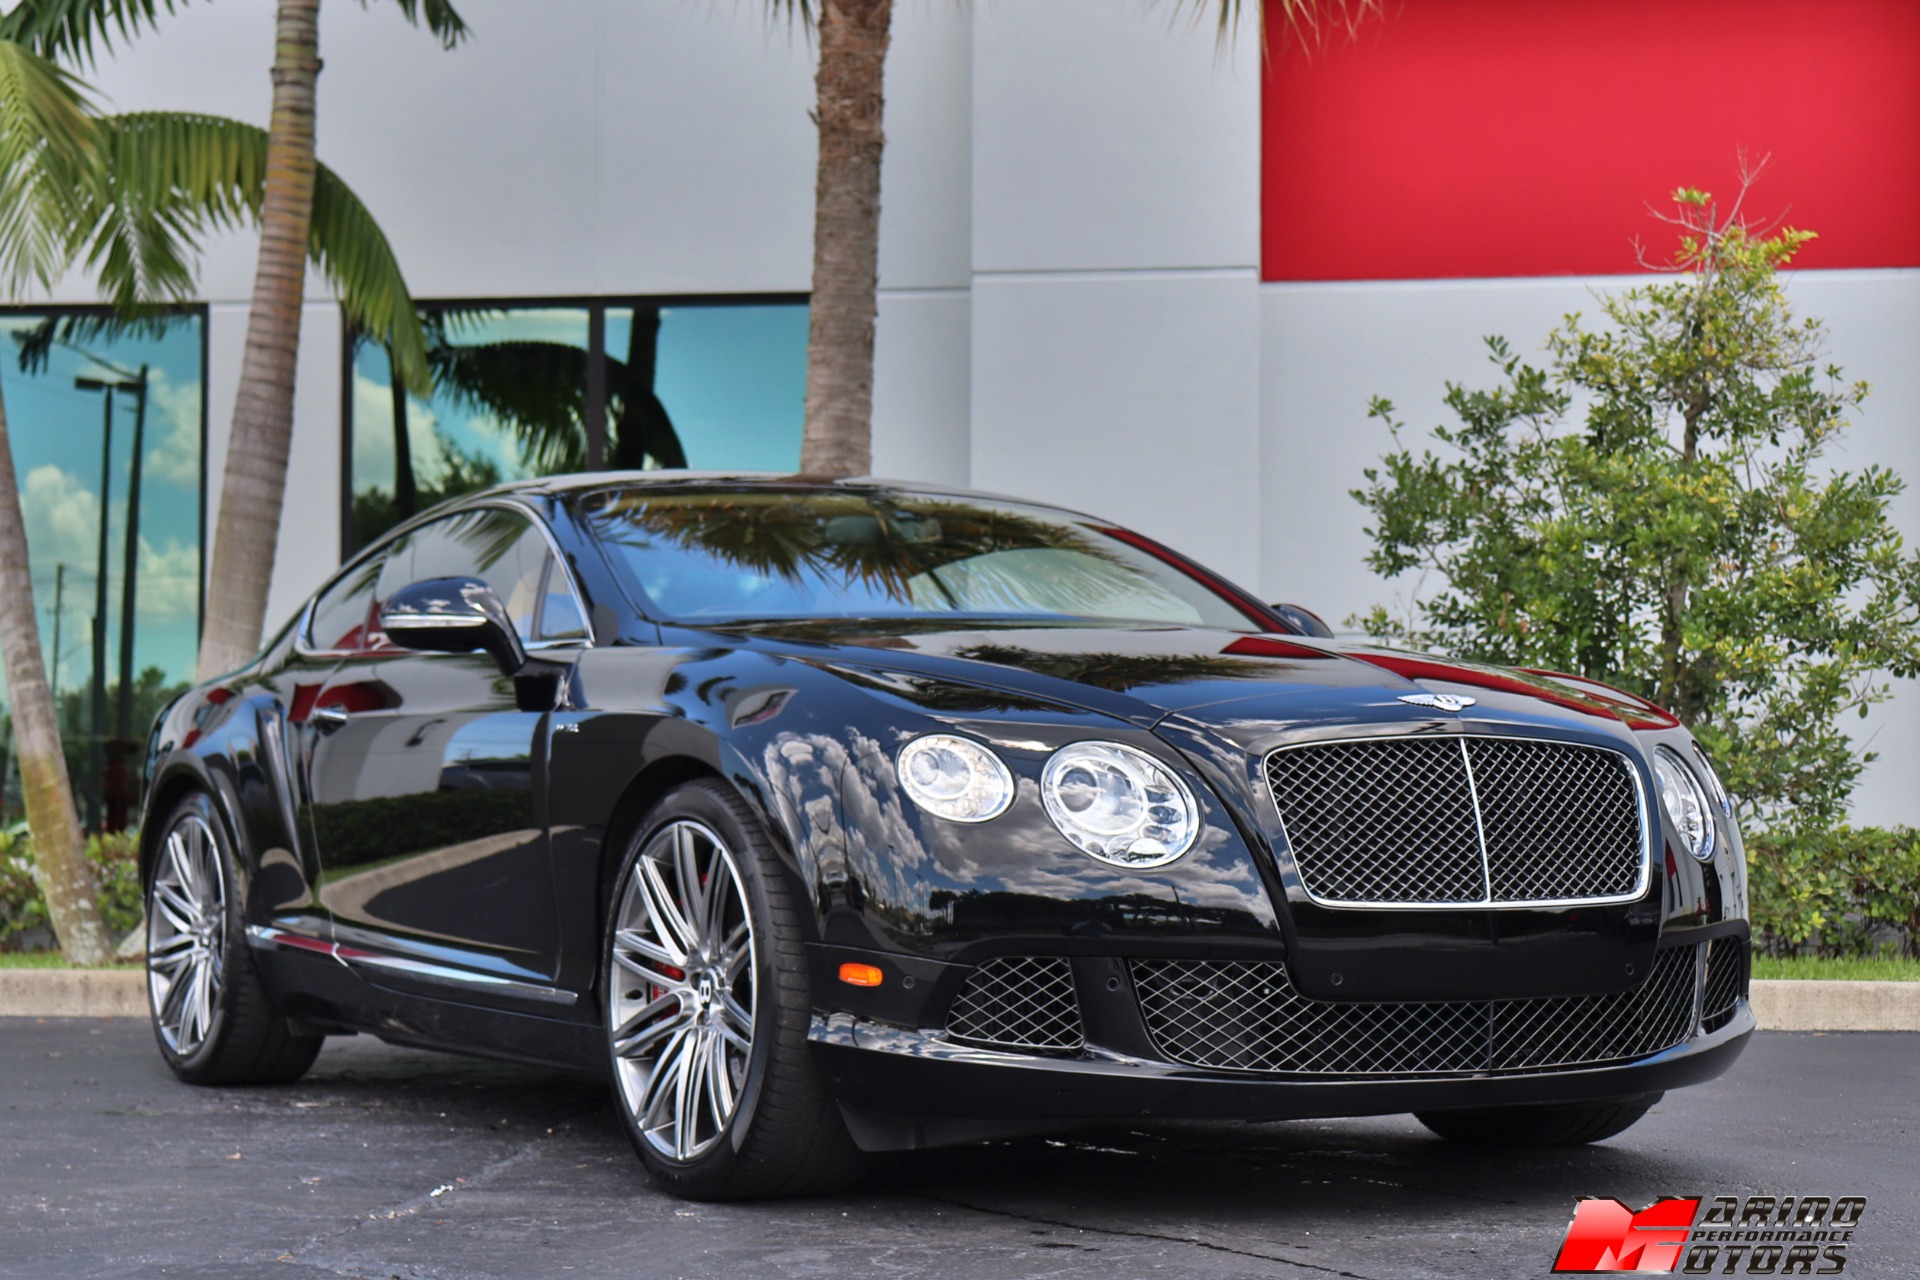 Used-2013-Bentley-Continental-GT-Speed